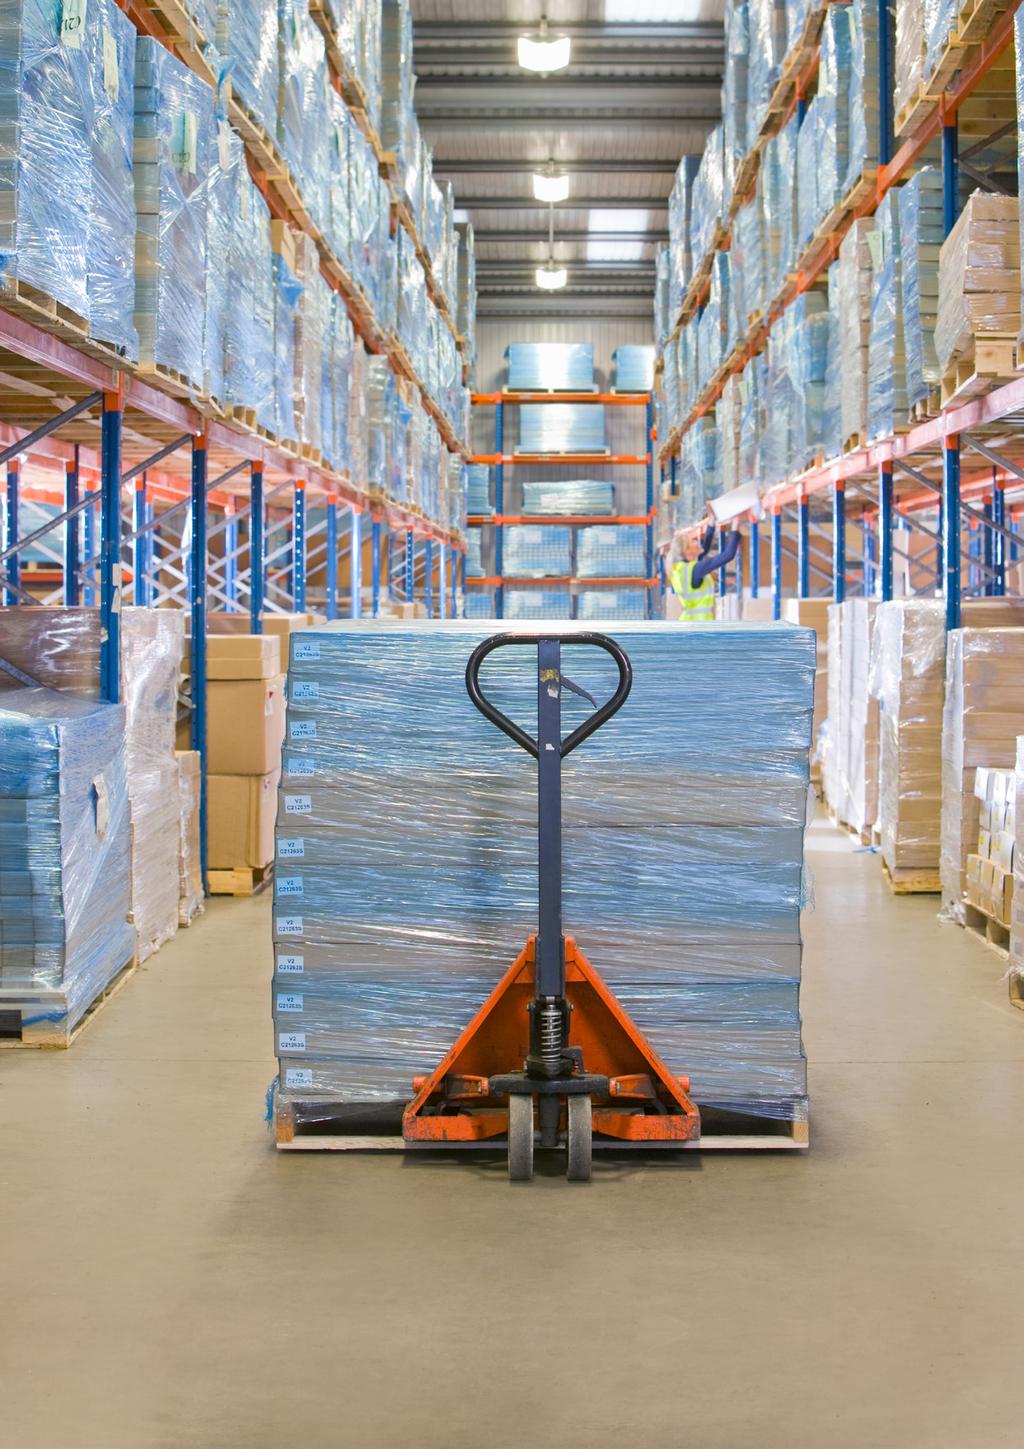 08 Case Study Case Study 09 Demand Forecasts for Distribution Centers Improve Product Availability dm runs two national distribution centers and six so-called volume distribution centers, supplying